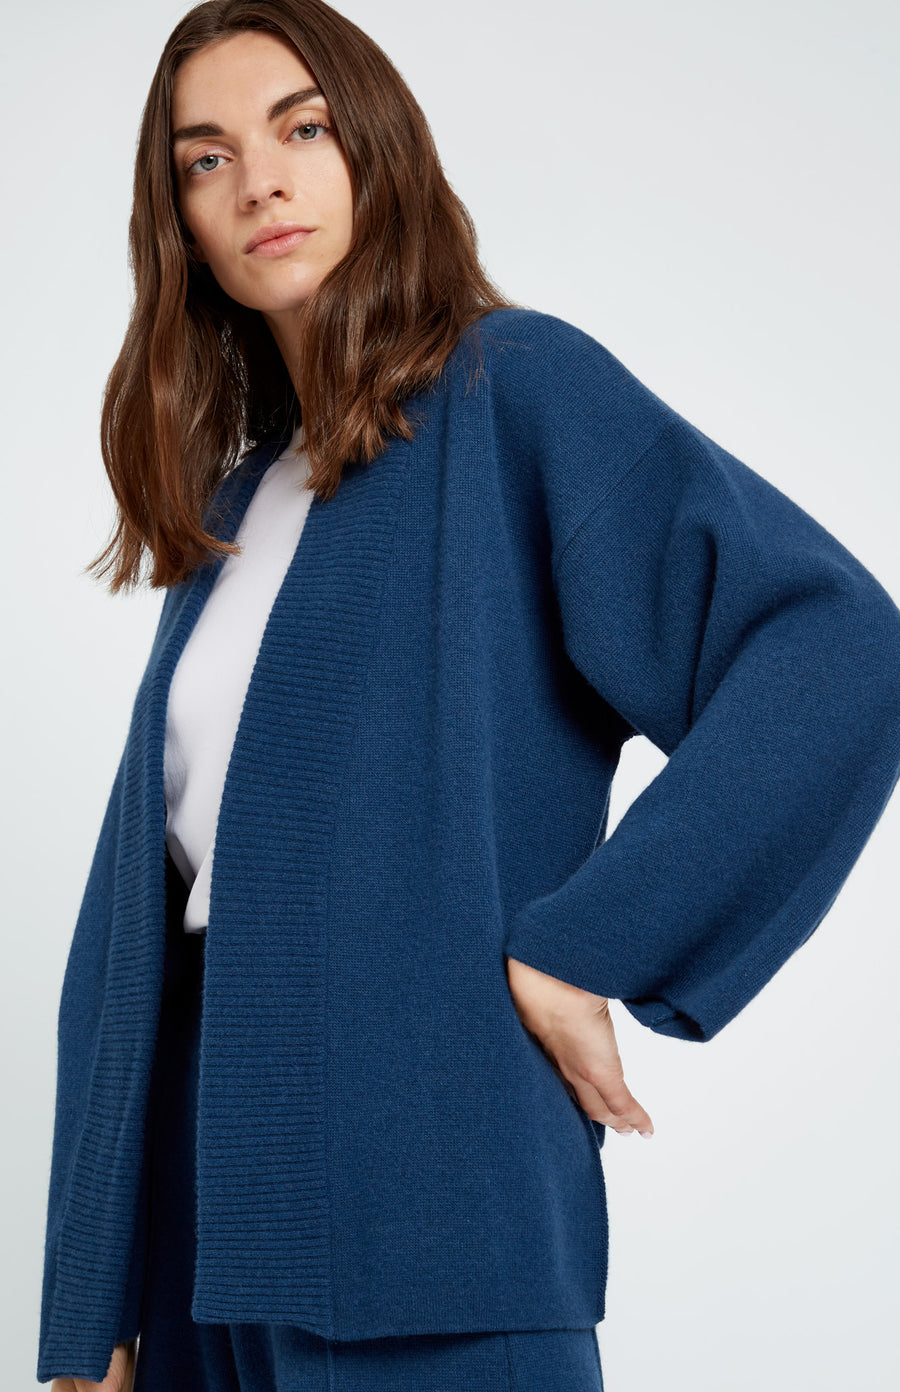 Pringle of Scotland Women's Cashmere Blend Wrap Cardigan in Night Sky side view